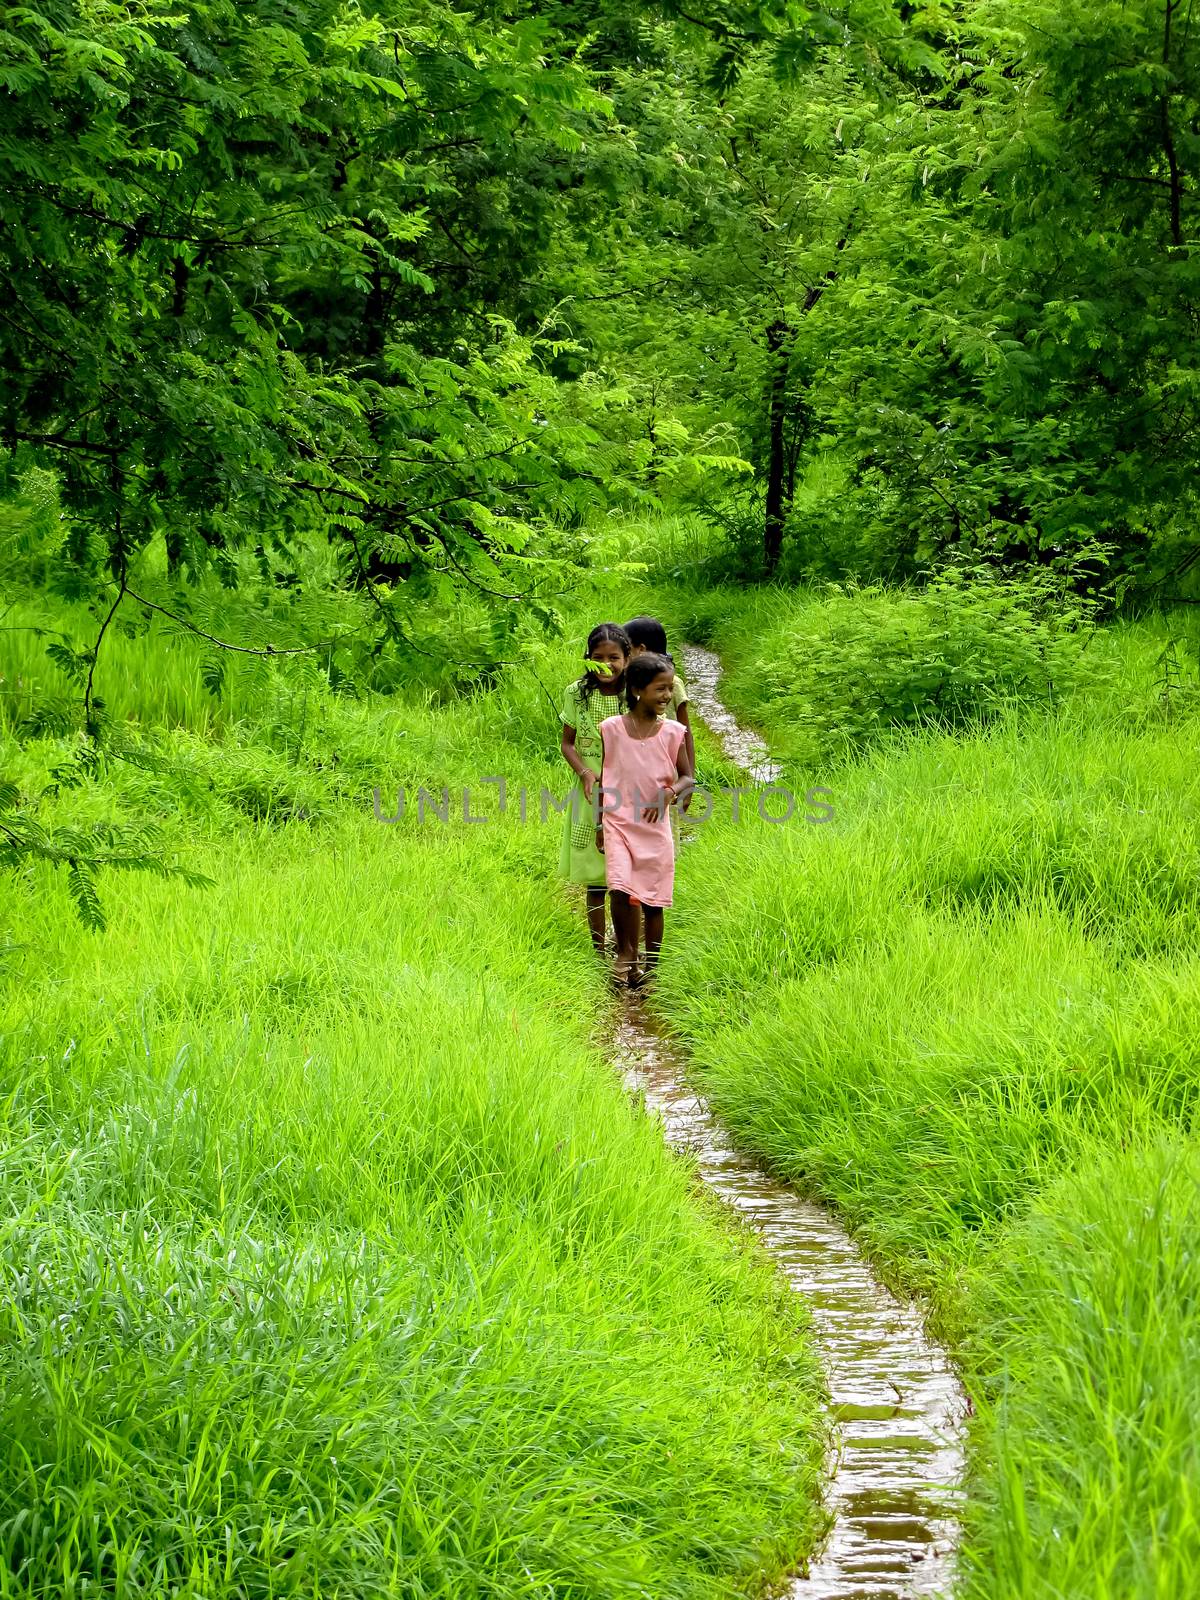 Village girls happily walking a small pathway surrounded by lush green fields . by lalam